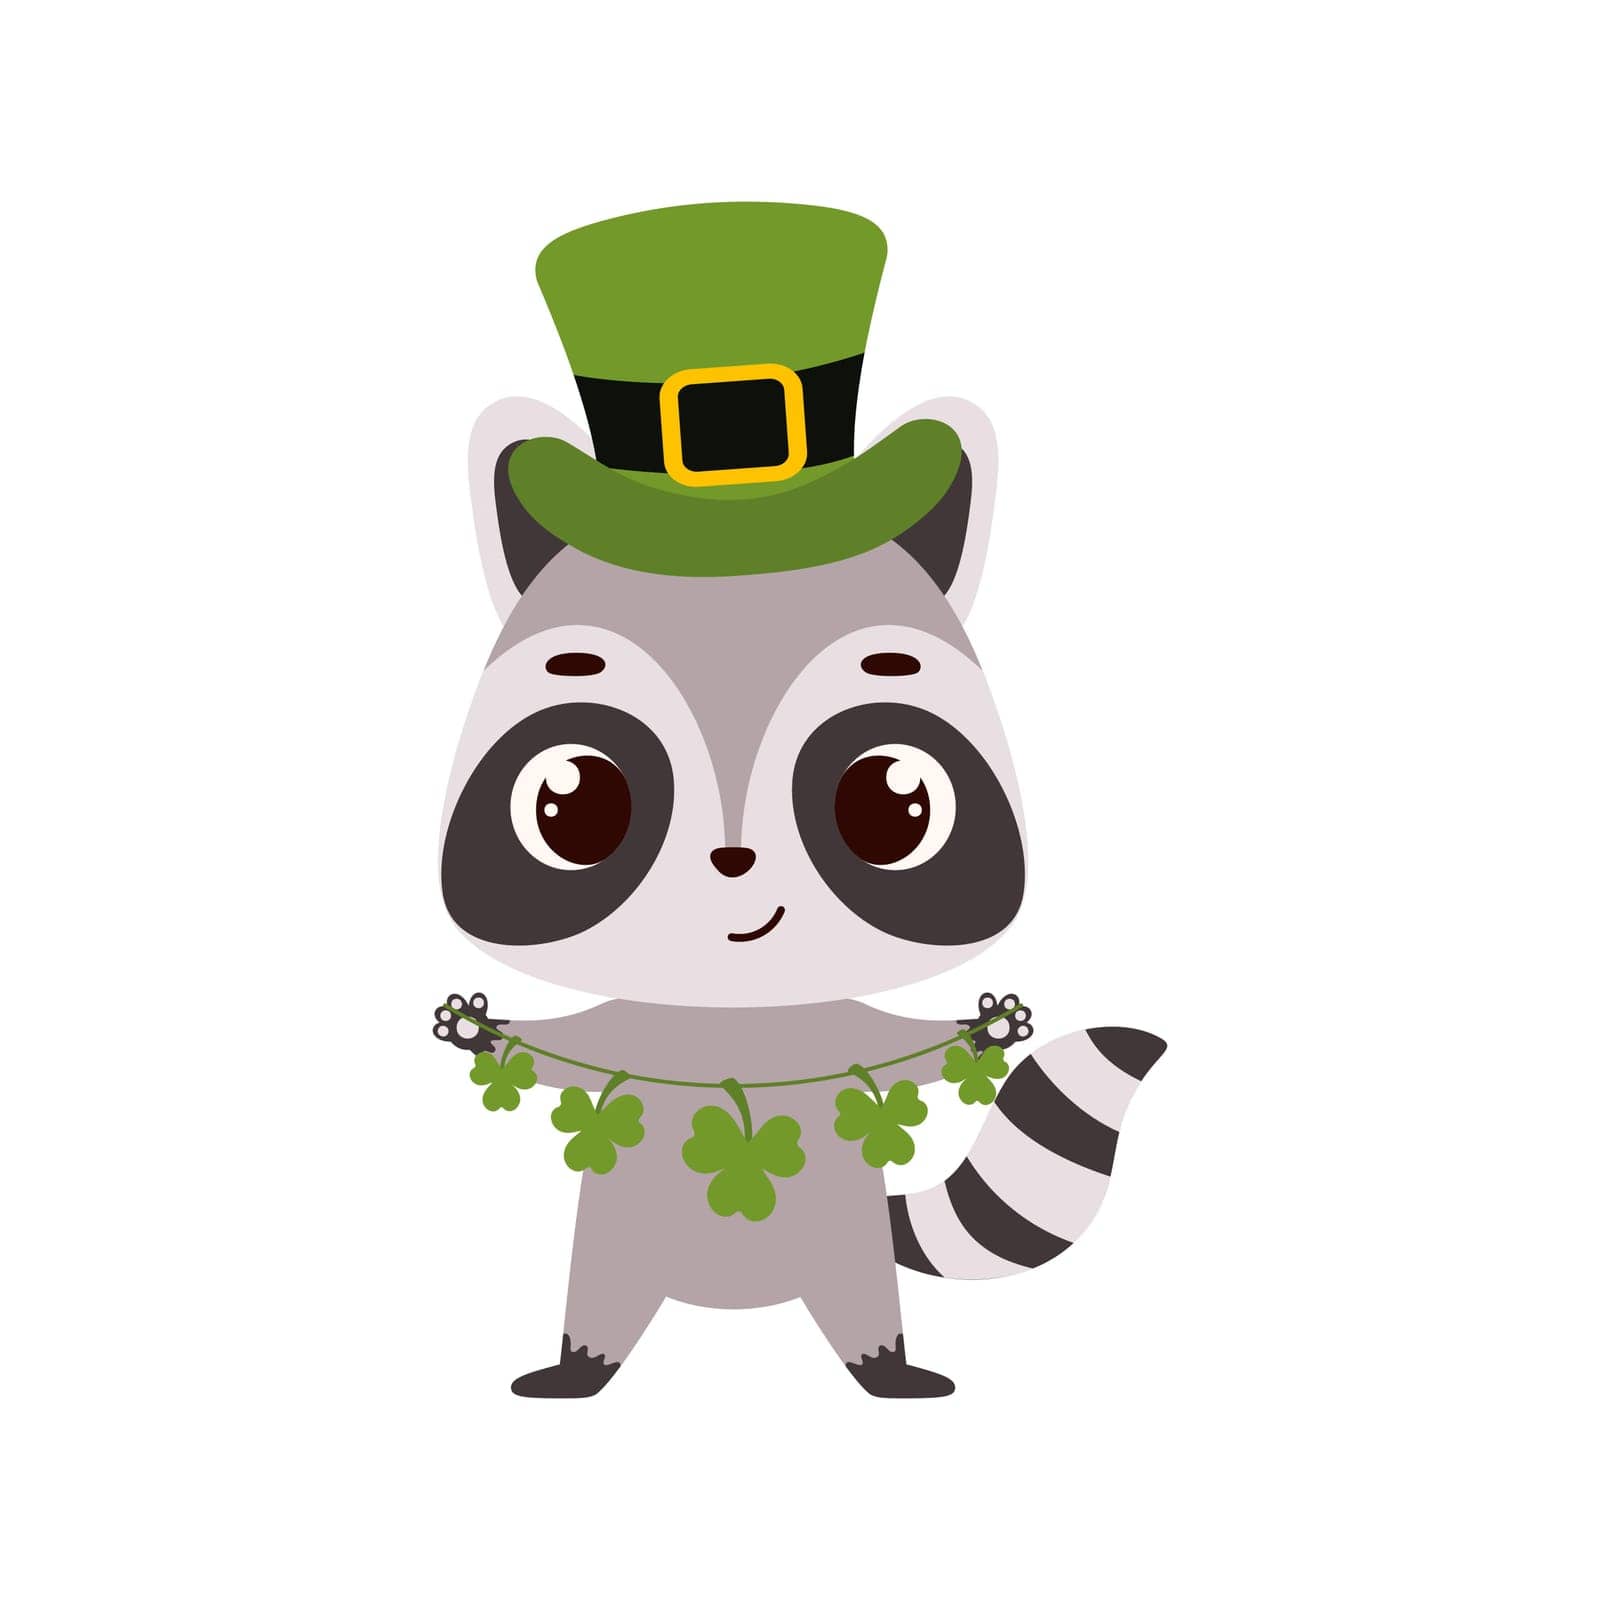 Cute raccoon in green leprechaun hat with clover. Irish holiday folklore theme. Cartoon design for cards, decor, shirt, invitation. Vector stock illustration by Melnyk